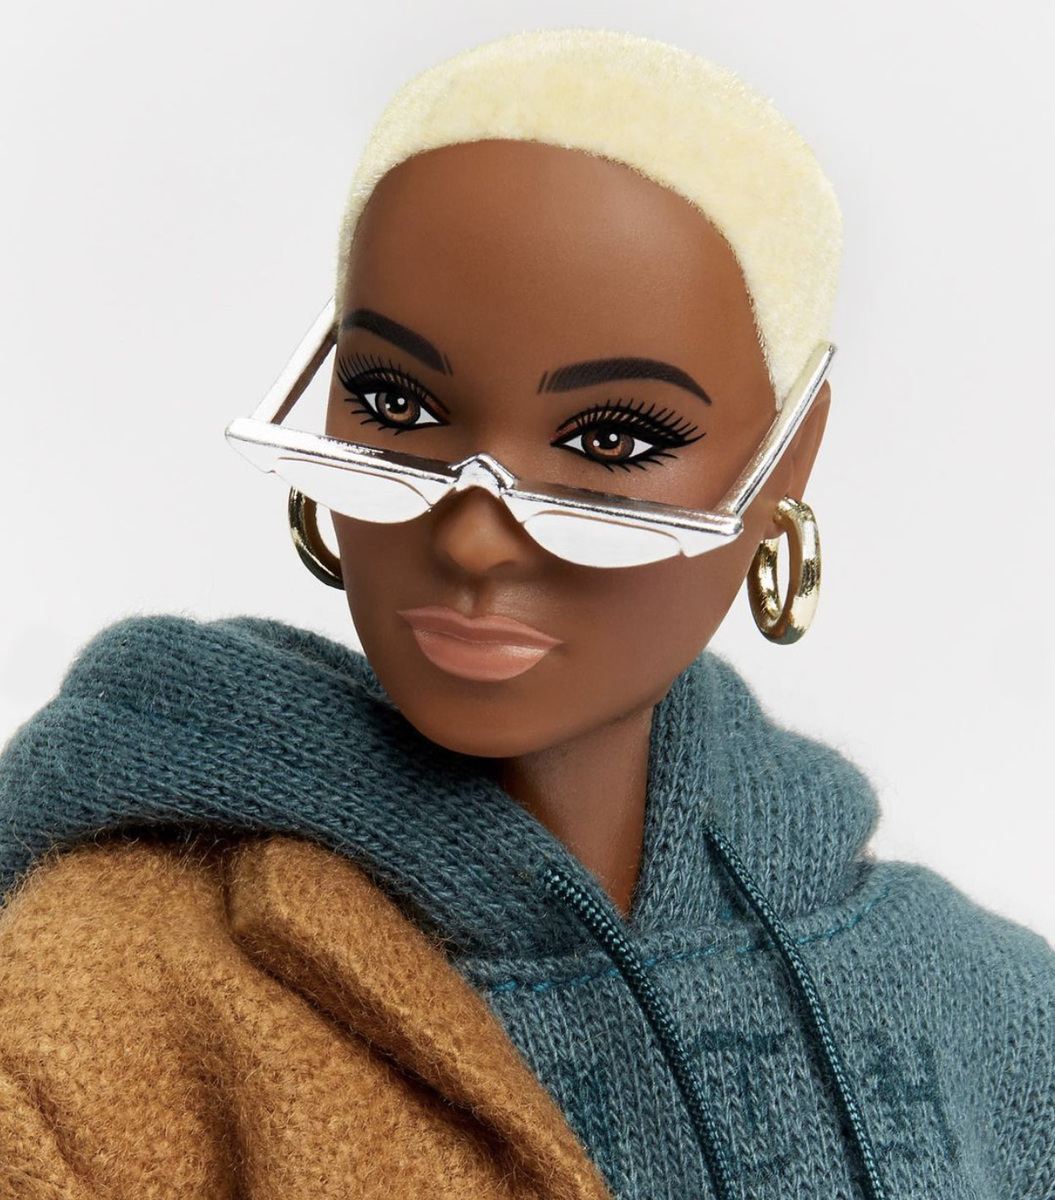 Barbie Is Now A Girl Living In A Kith World 